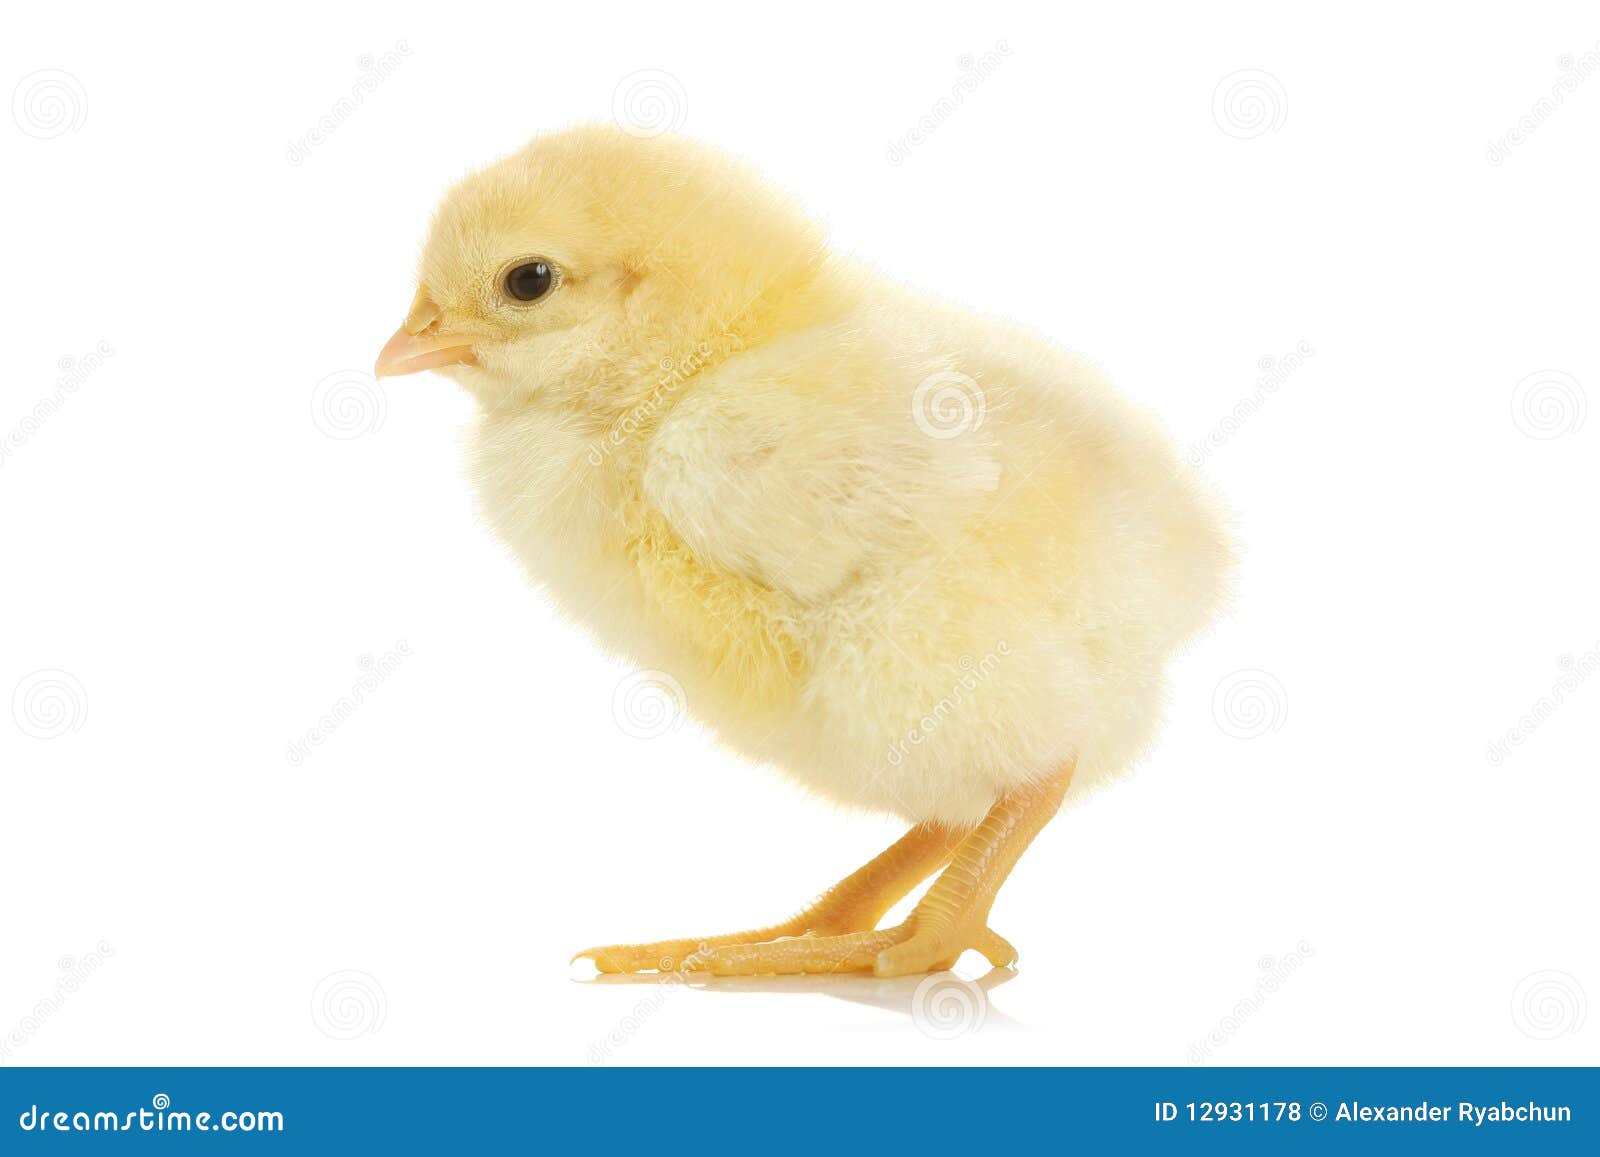 Baby Chicken Royalty Free Stock Photos - Image: 12931178